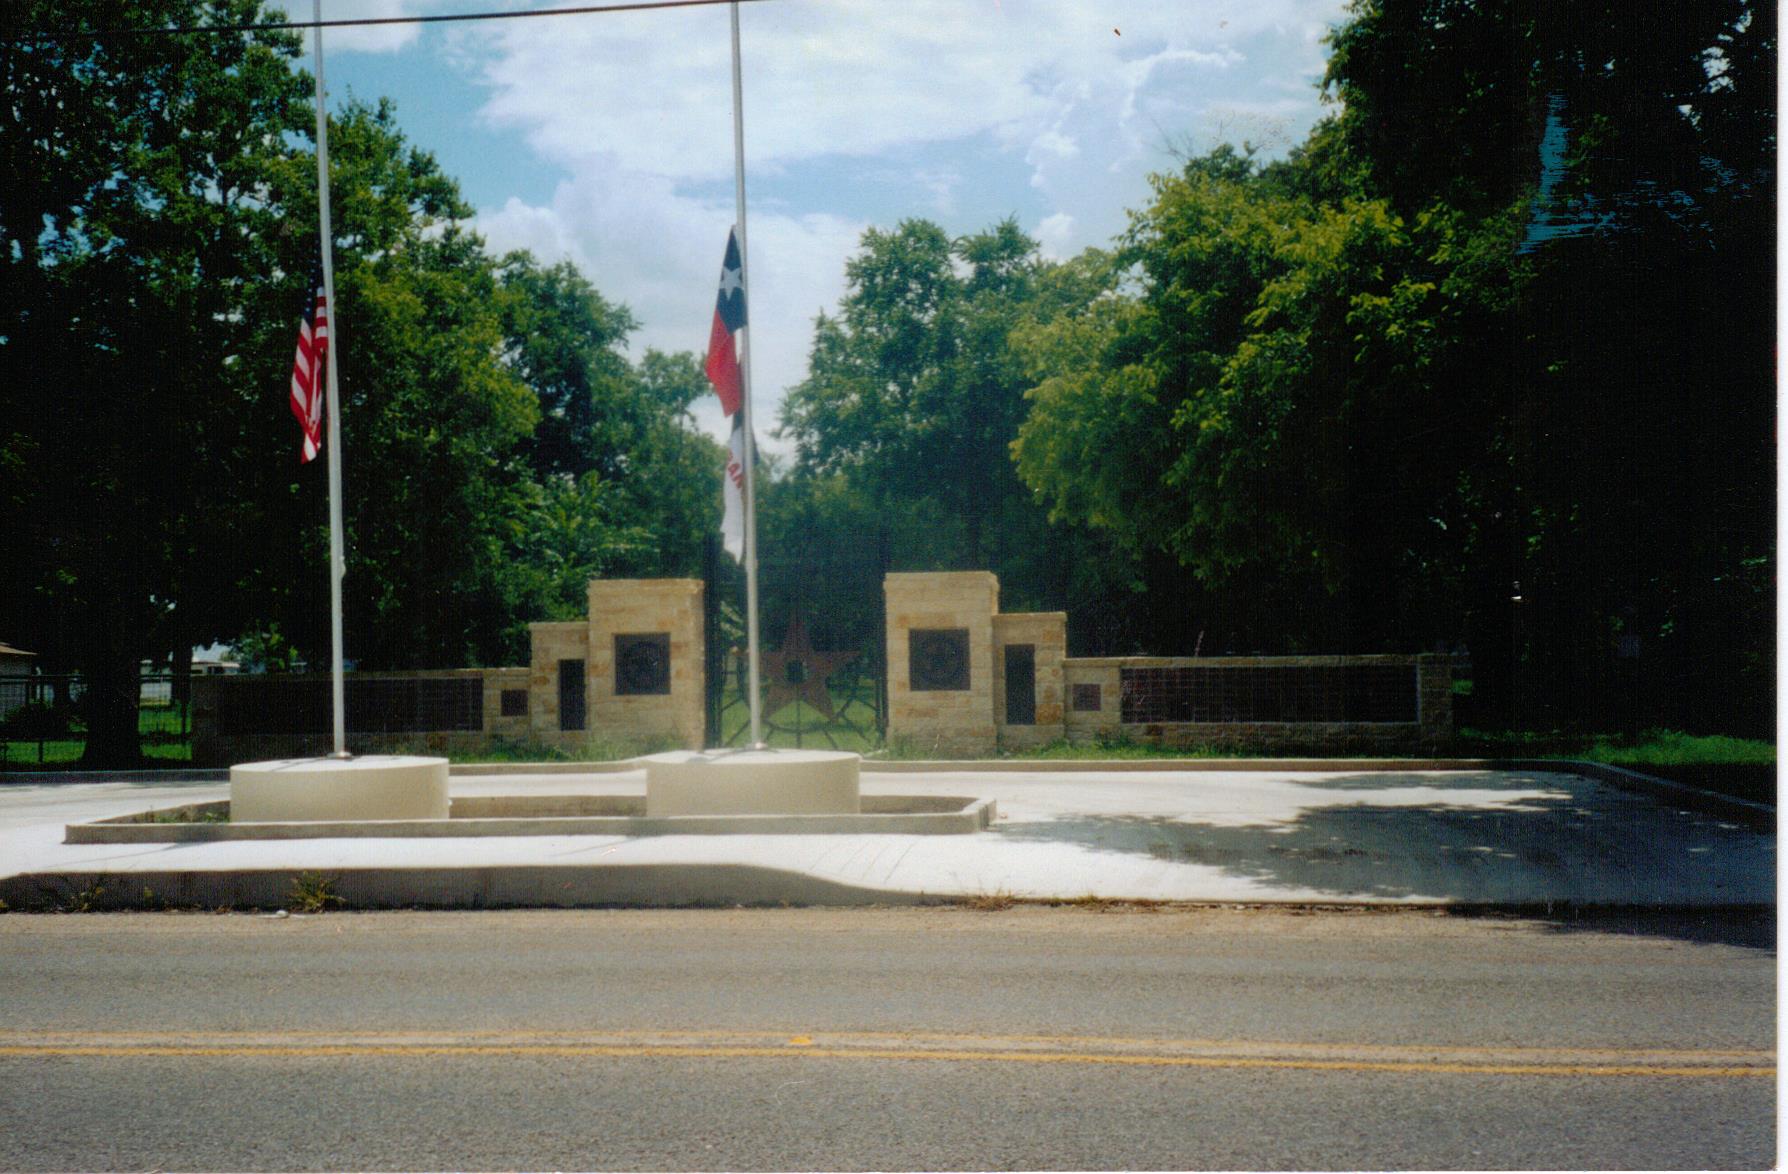 entry gate to Center Point Heritage park, large limstone and iron gate with flagpole in front flying the Texas flag